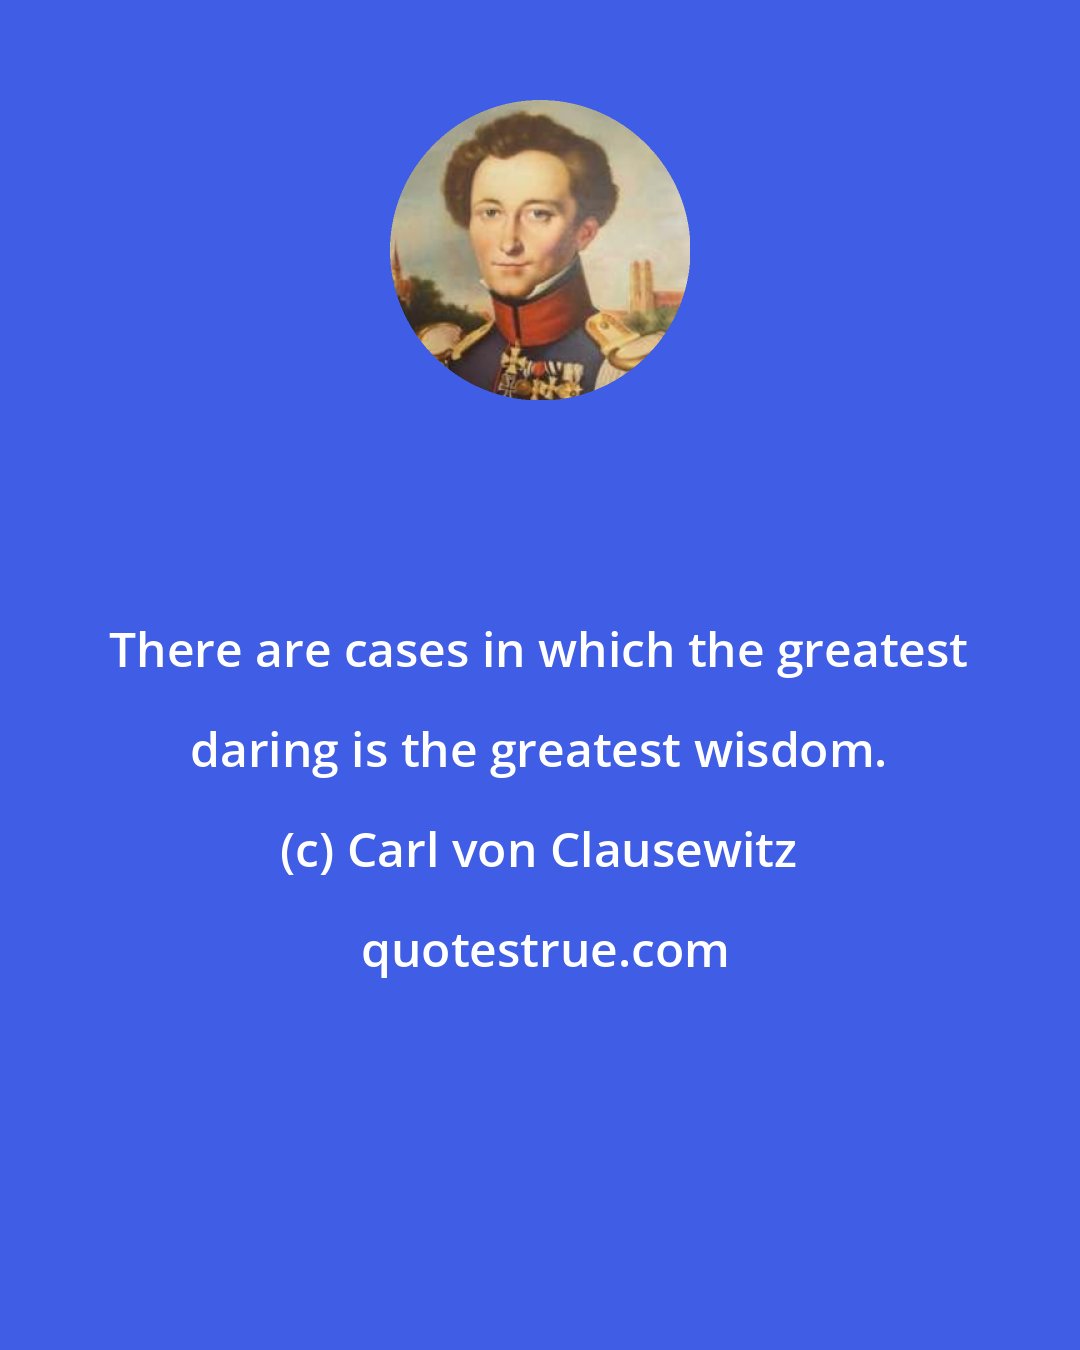 Carl von Clausewitz: There are cases in which the greatest daring is the greatest wisdom.